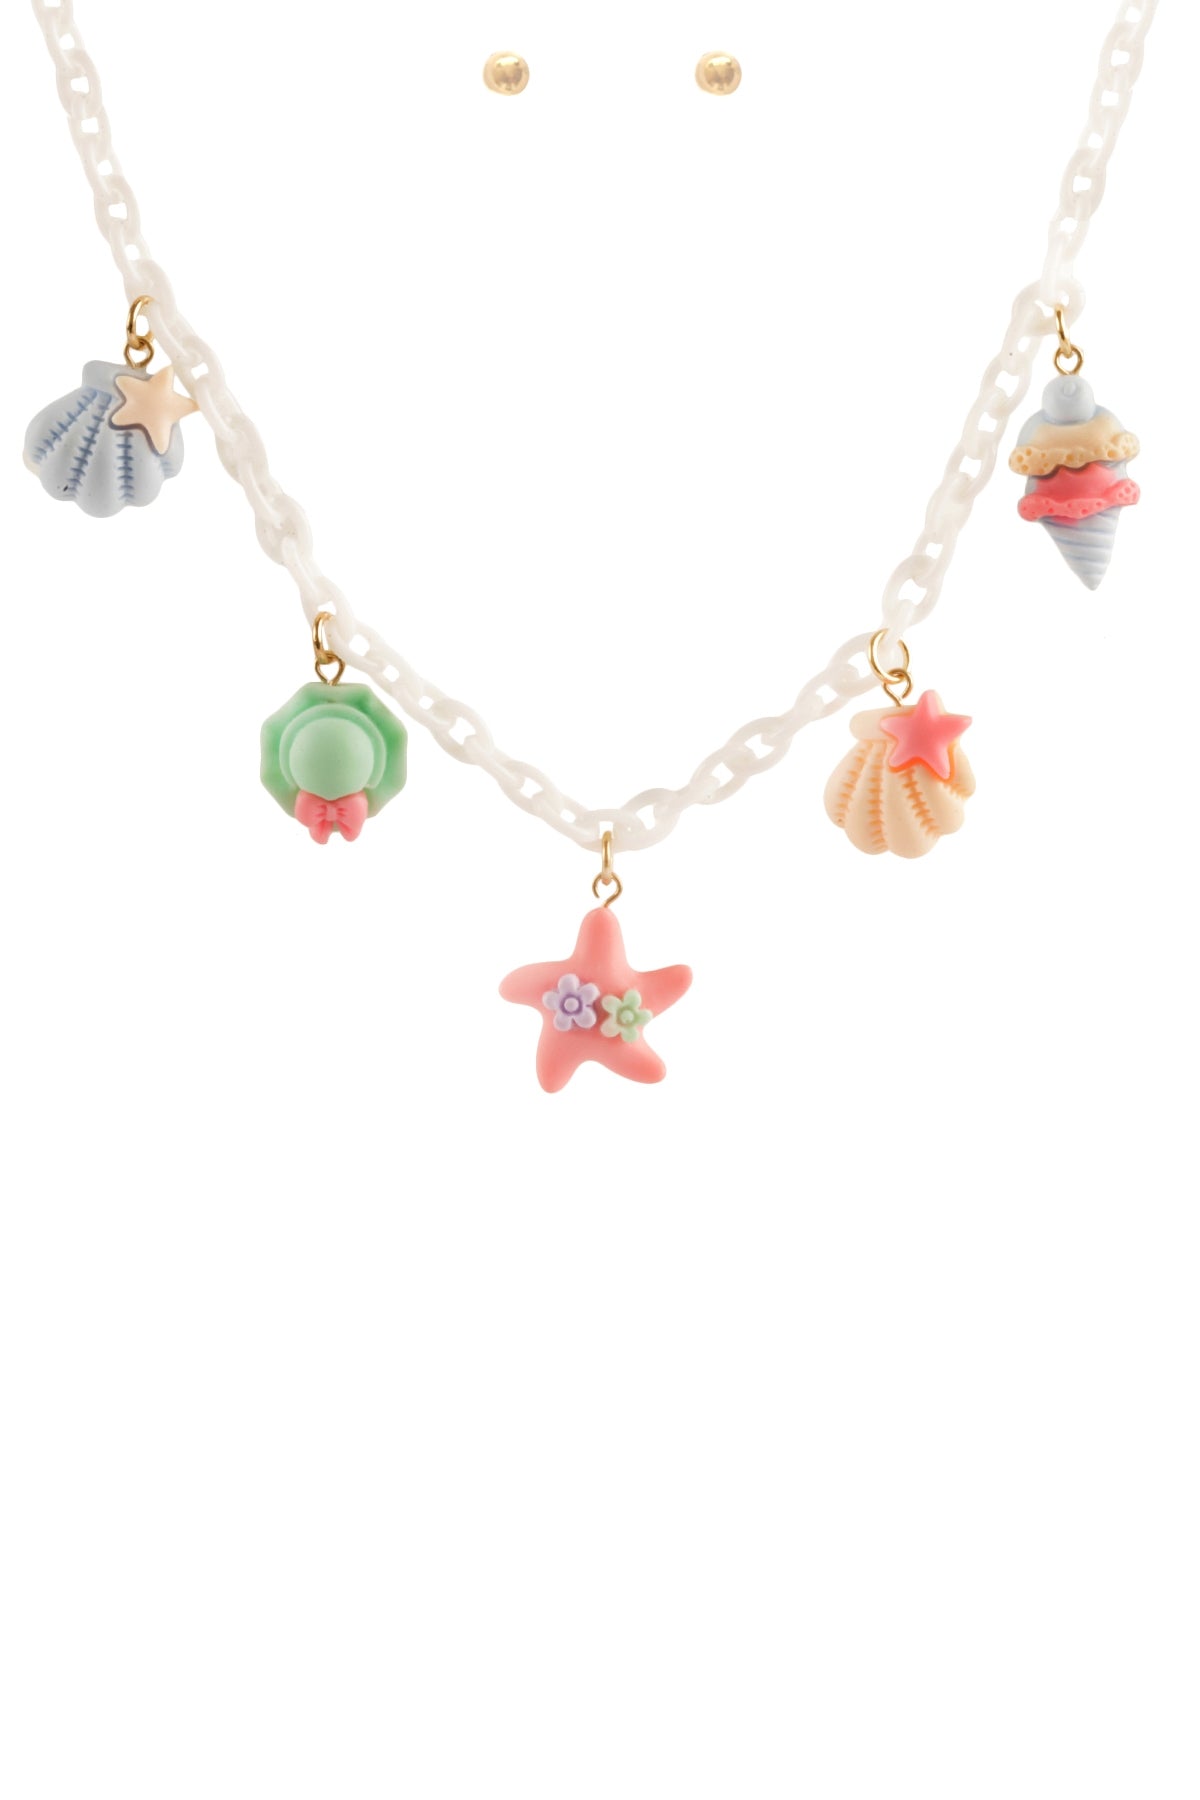 SHELL, ICE CREAM, HAT SUMMER DAINTY PENDANT ACETATE NECKLACE AND EARRING SET